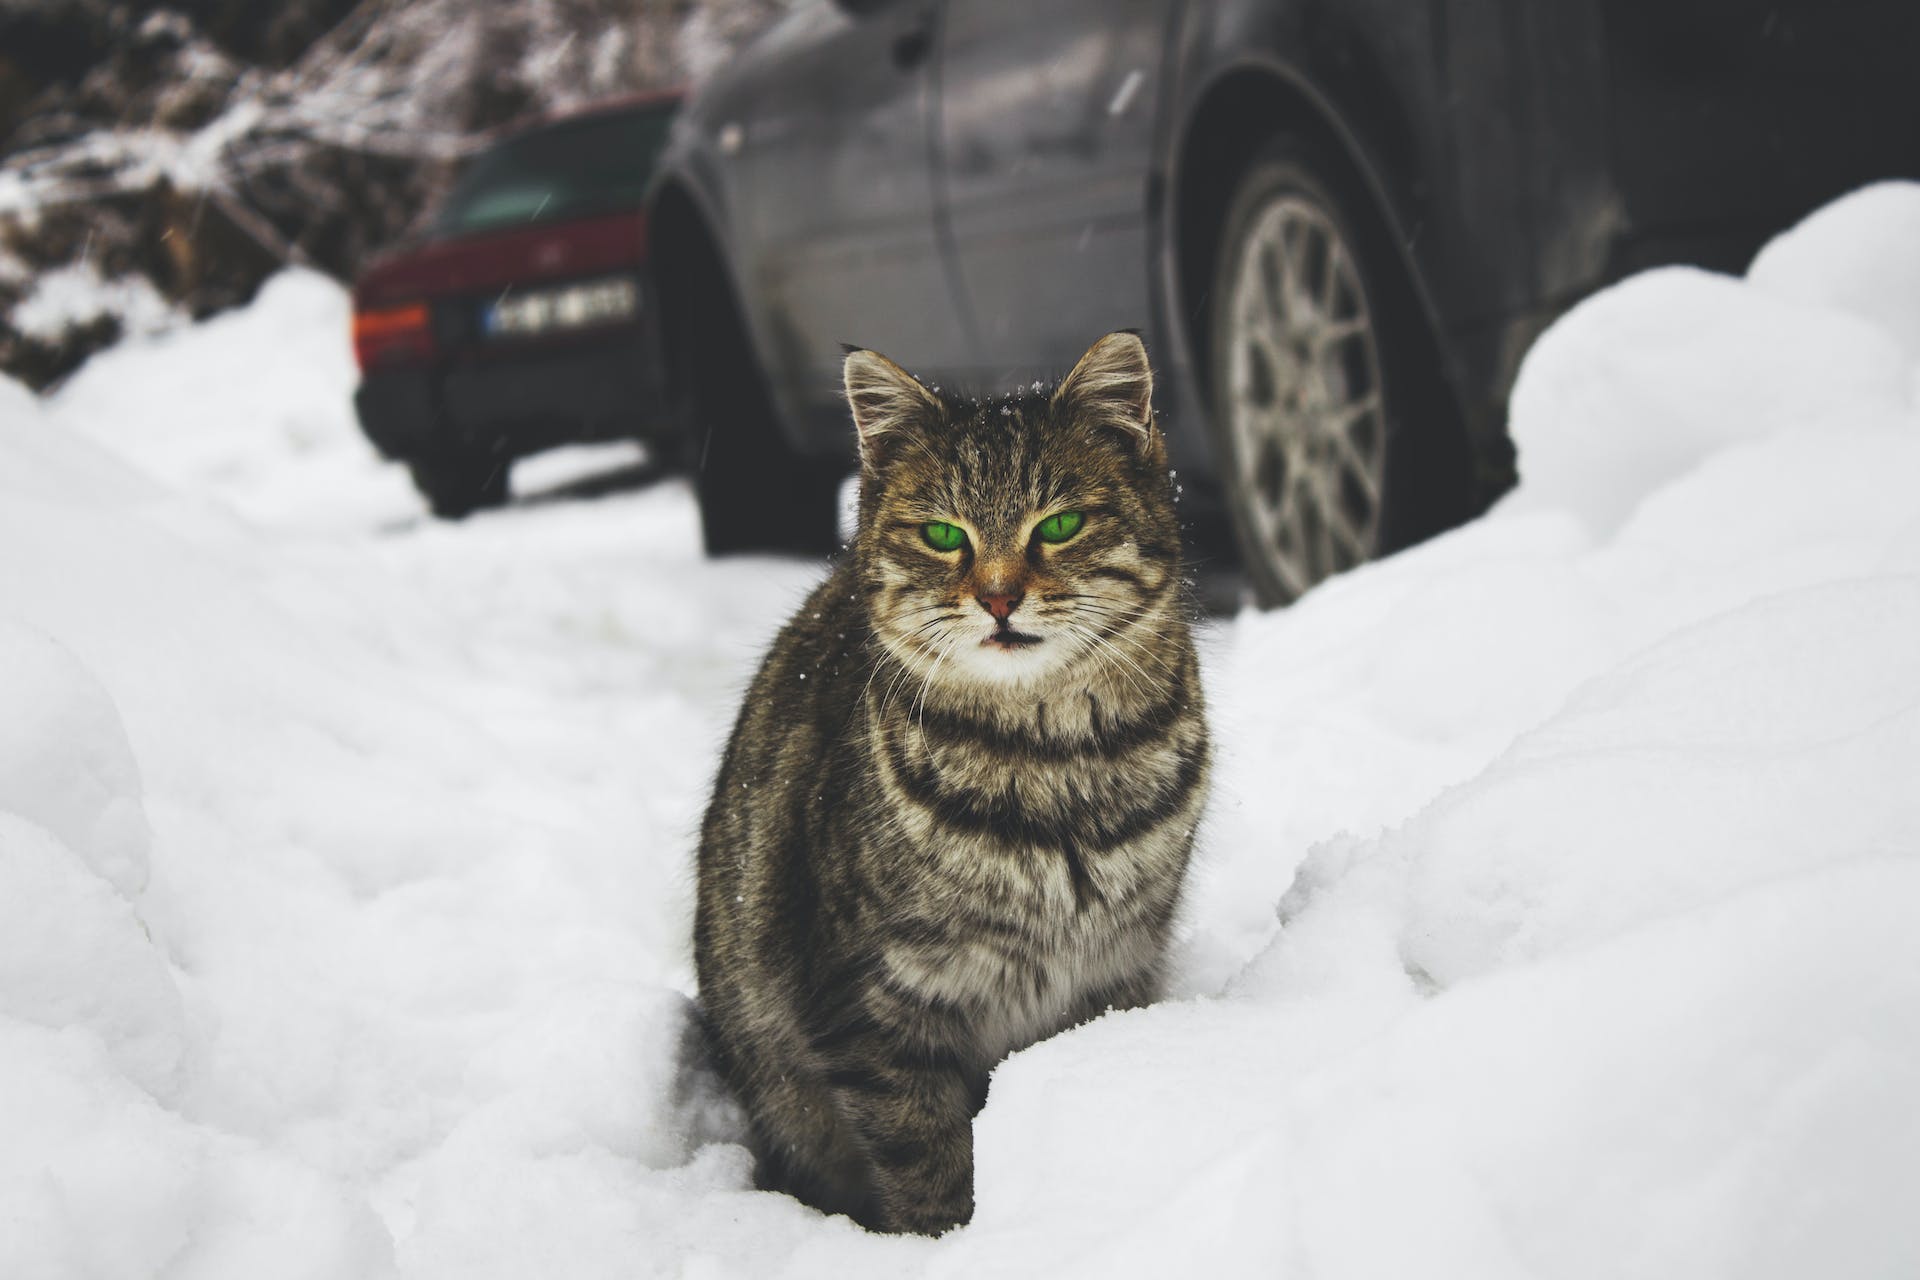 An outdoor cat sitting in the snow beside a car